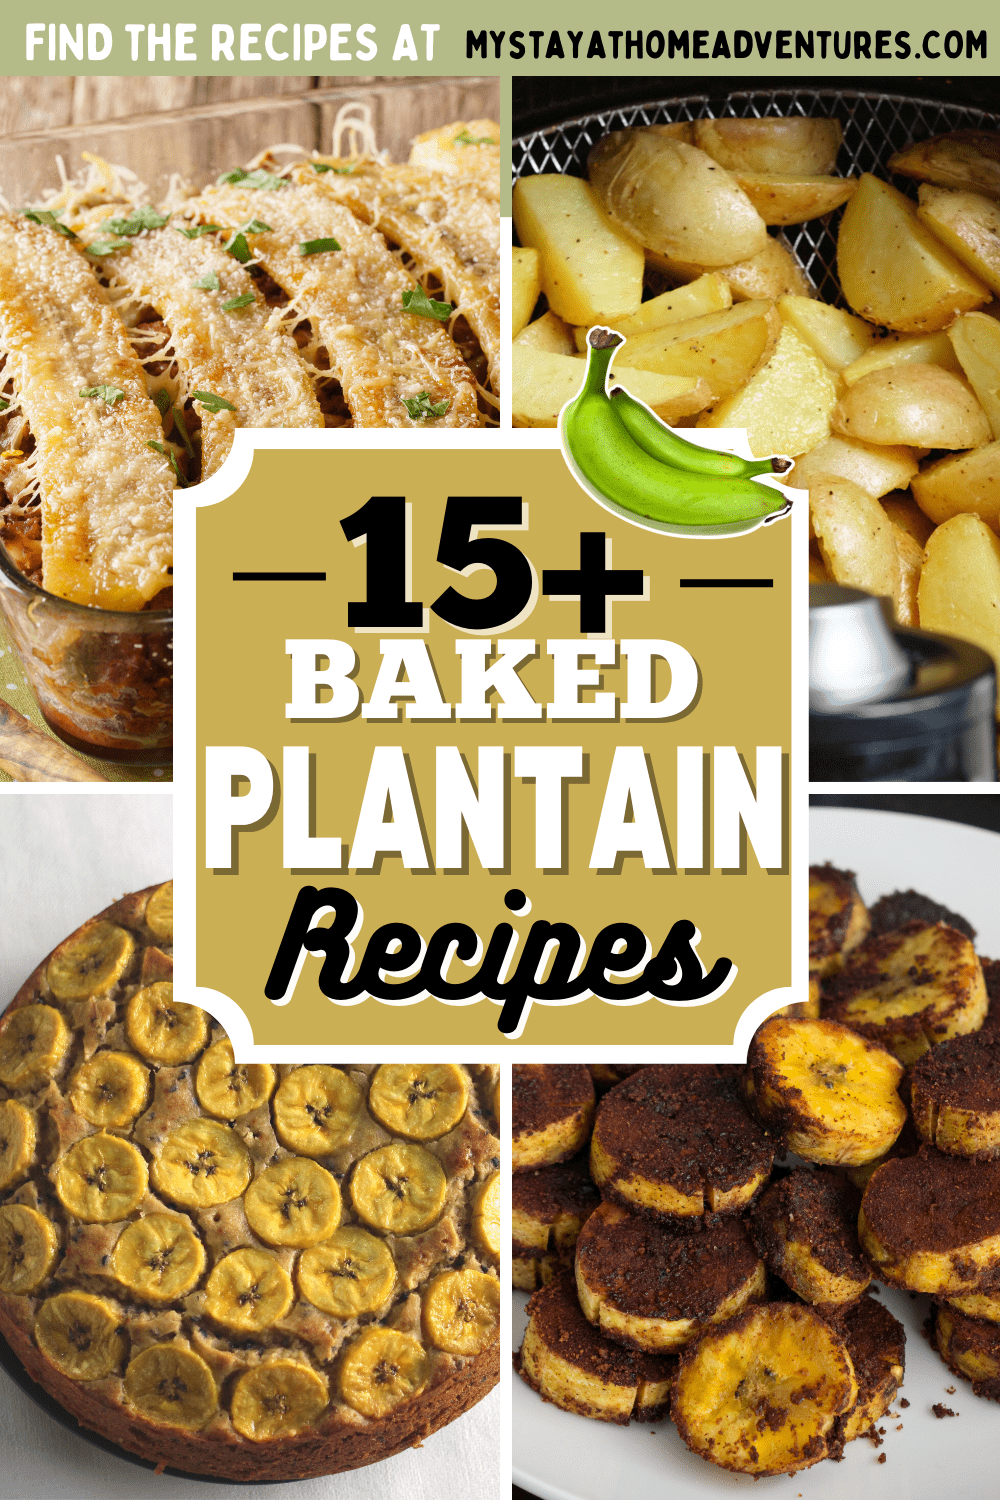 Don't miss out on the amazing flavor of baked plantains! Get inspired with our collection of seventeen tasty recipes featuring this nutritious fruit. Try one today and savor the deliciousness! #BakedPlantainRecipes via @mystayathome